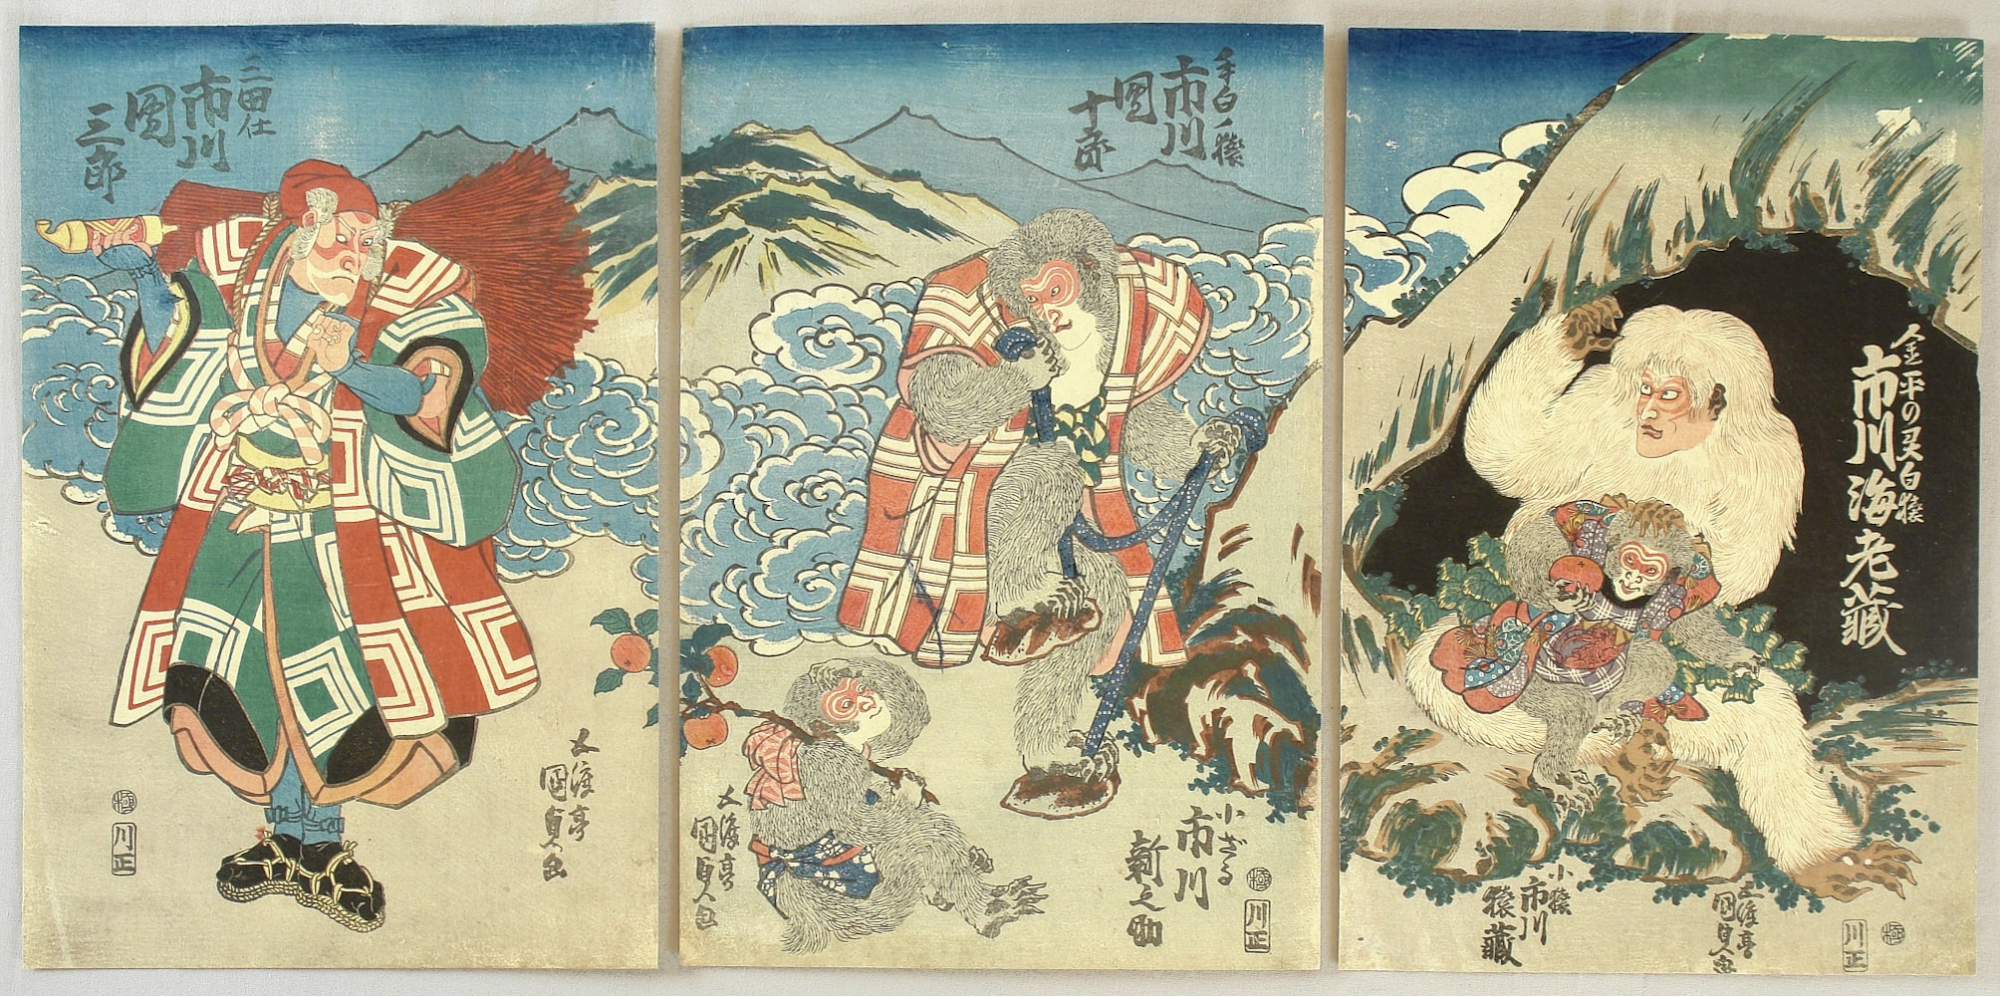 Serene Japanese woodblock prints of a couple amidst mountains - a perfect blend of art and nature